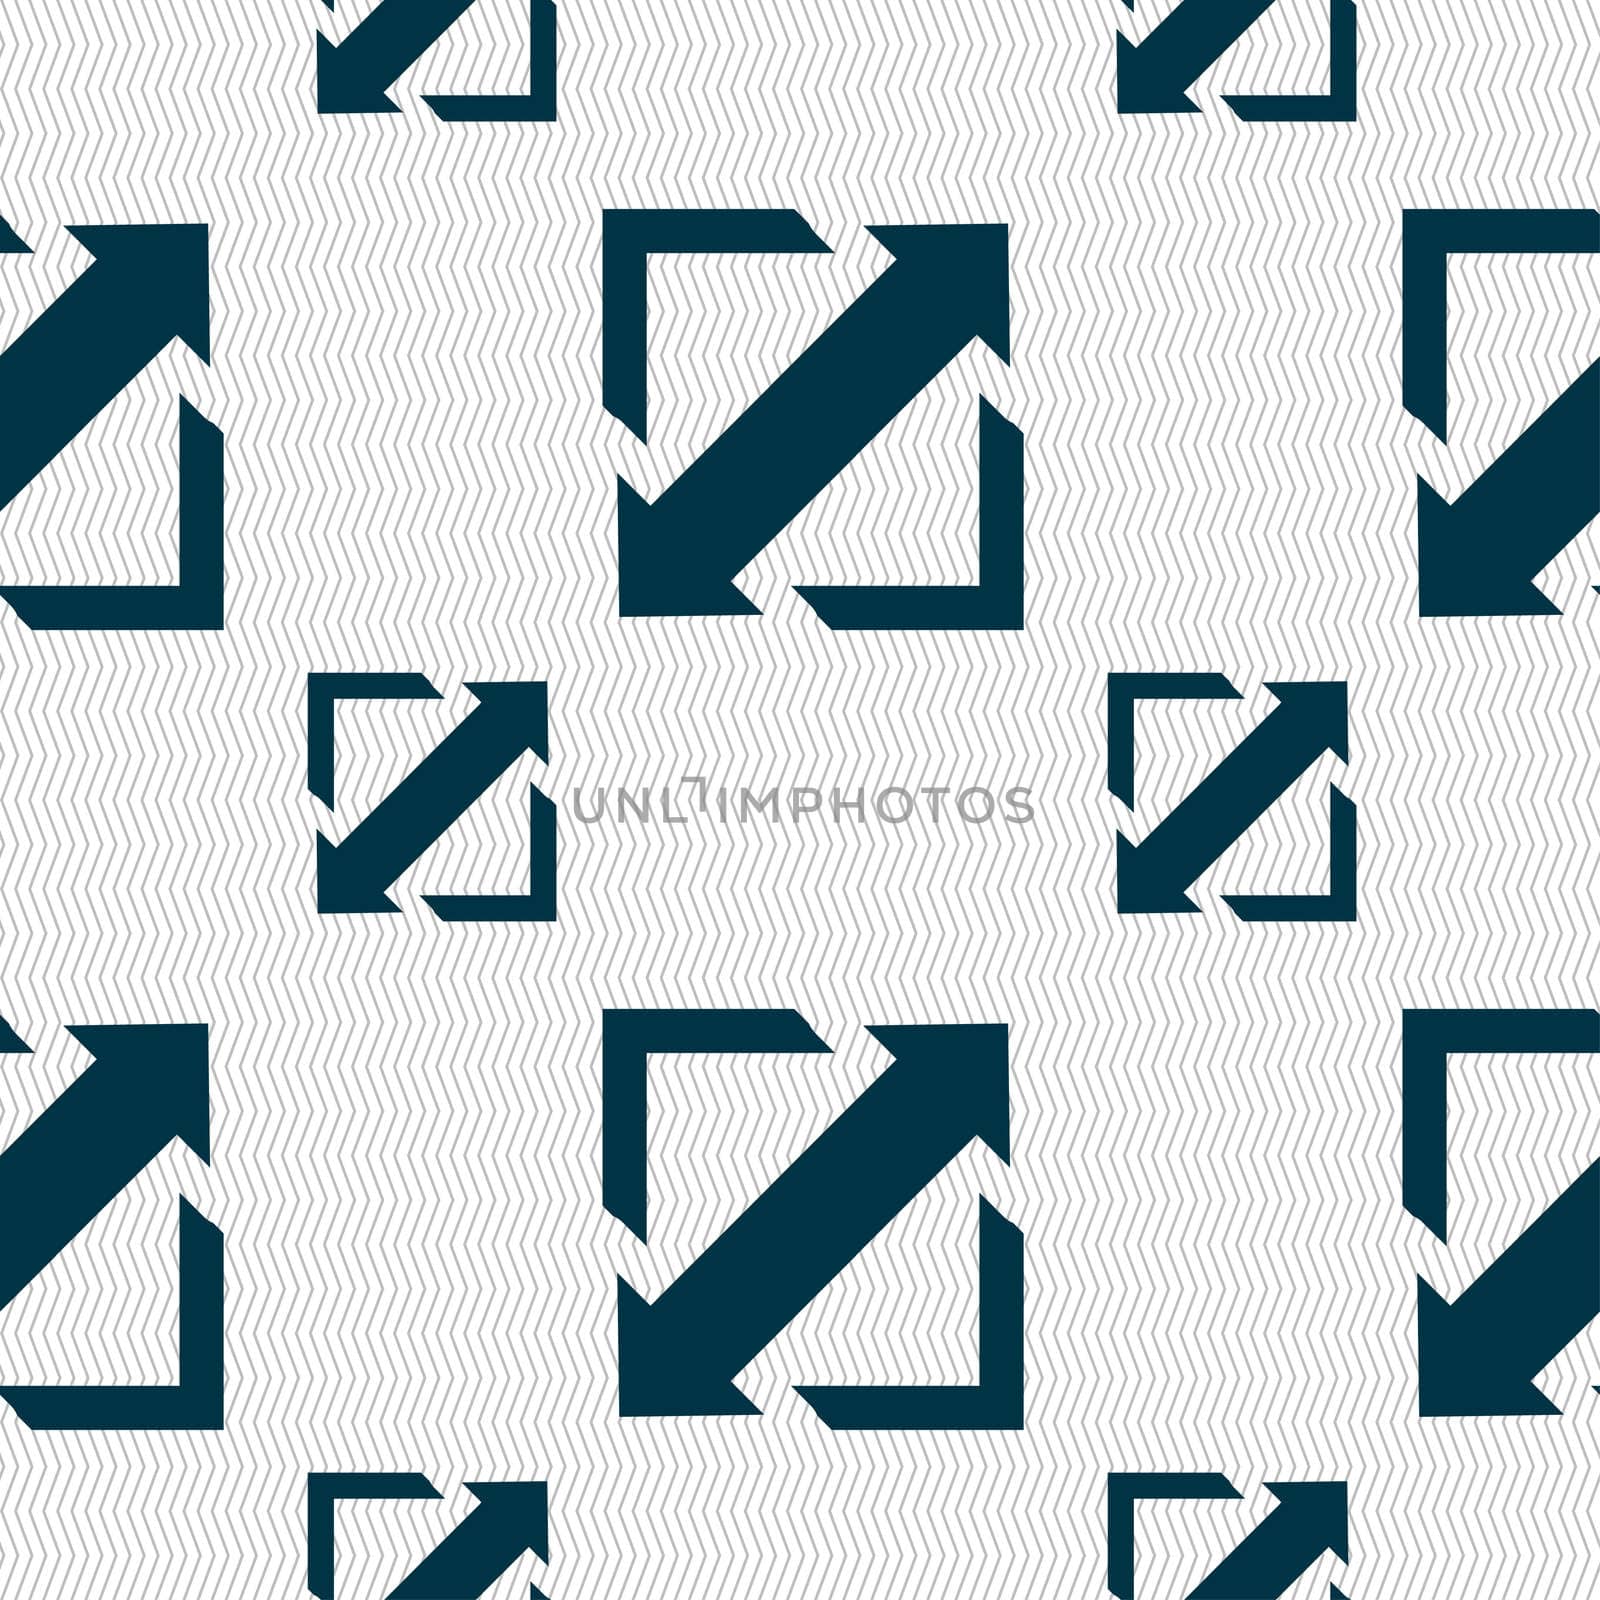 Deploying video, screen size icon sign. Seamless pattern with geometric texture. illustration